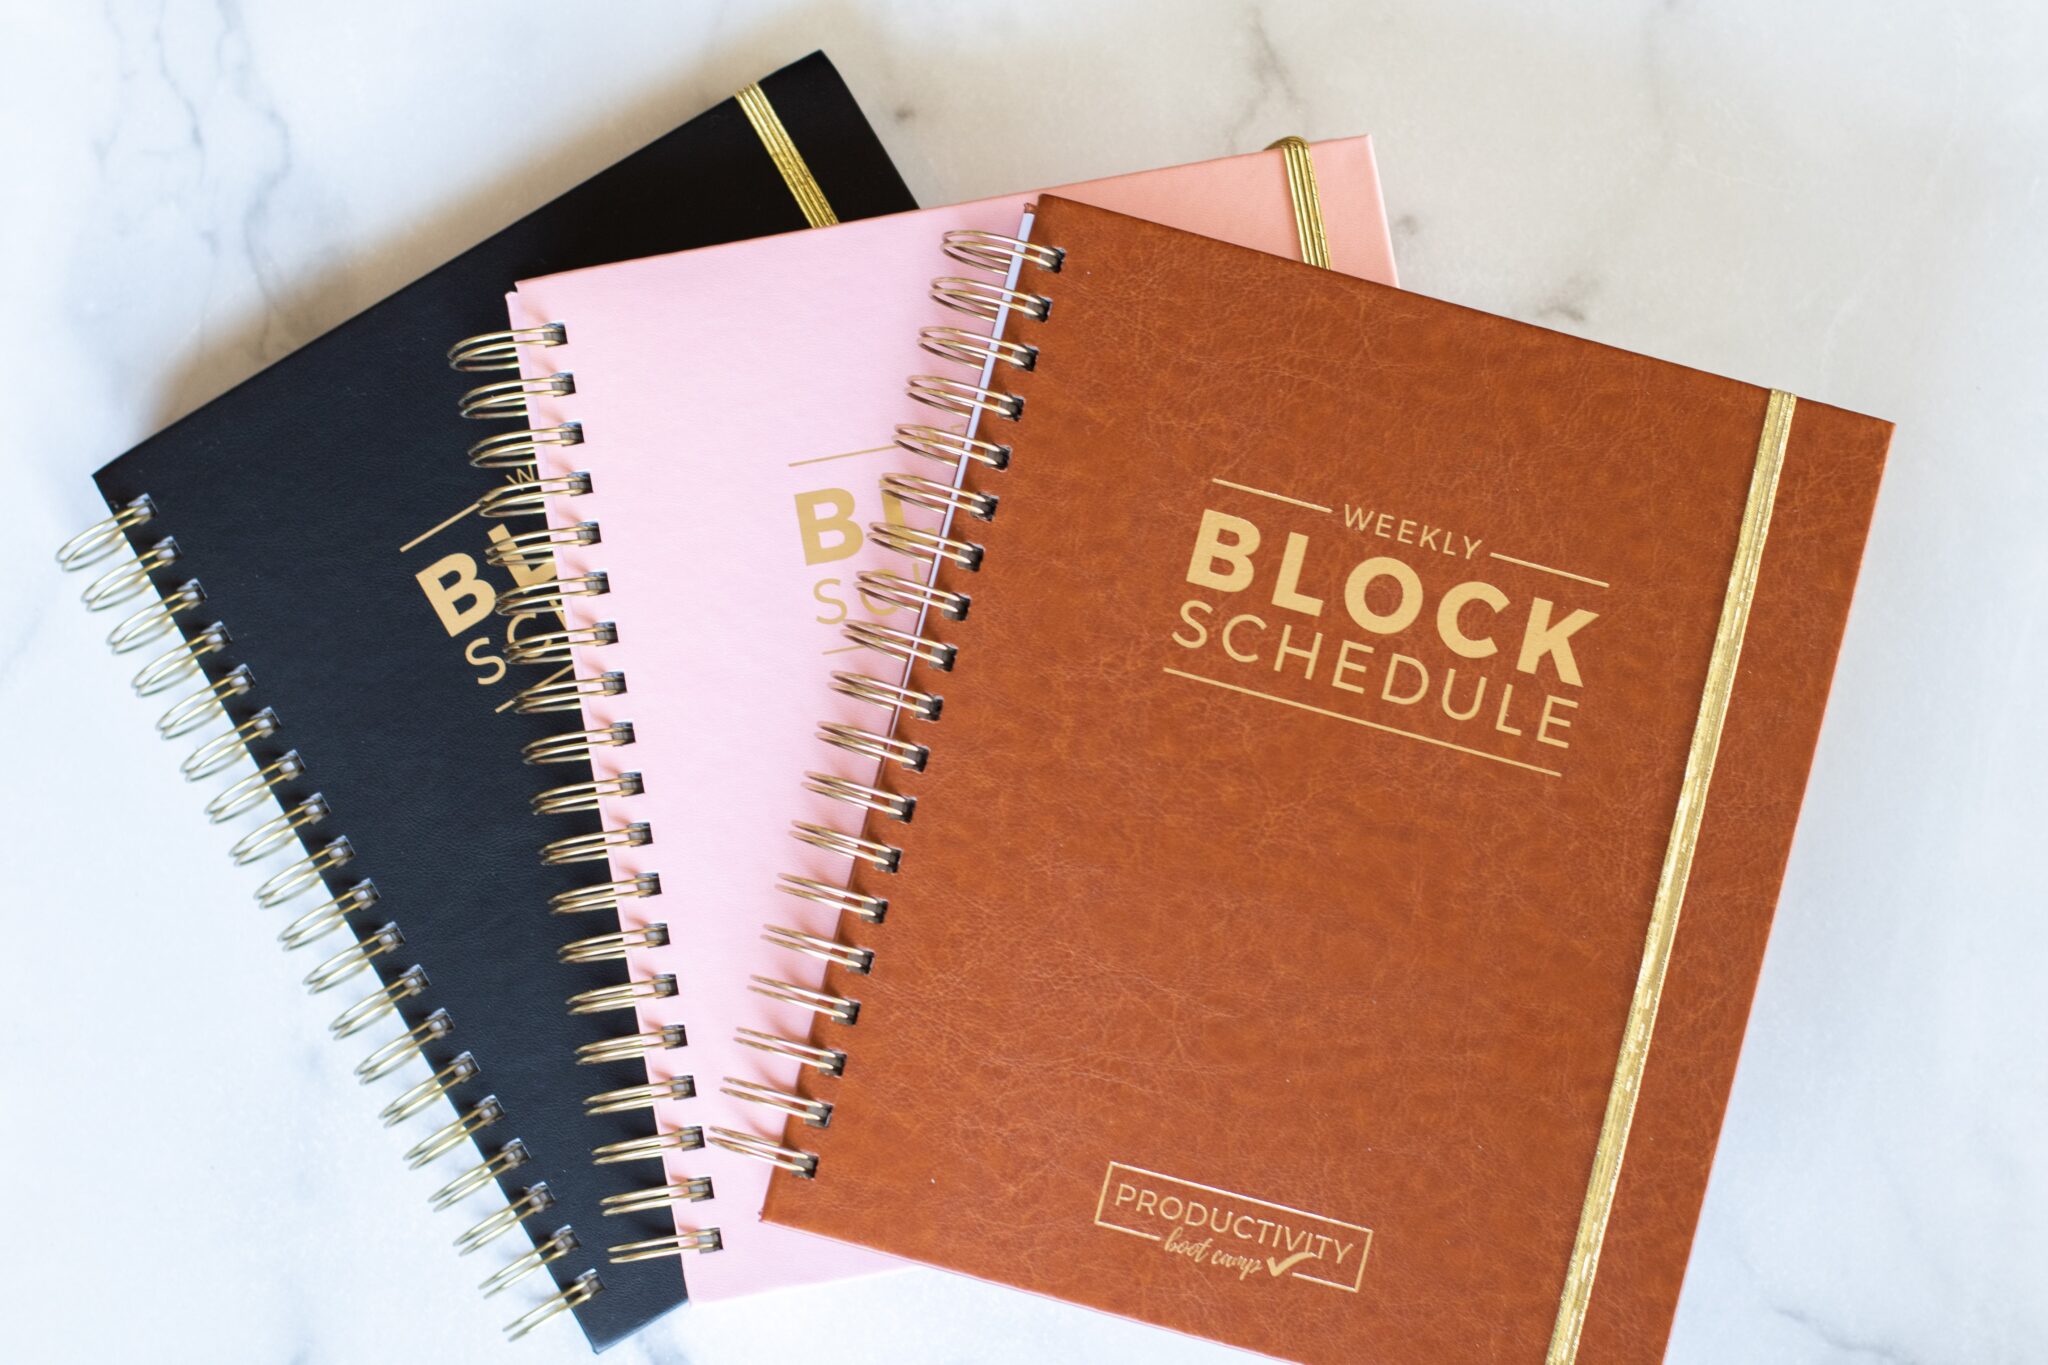 Block Schedule™ Planner | Leather Cover (weekly version) is HERE!